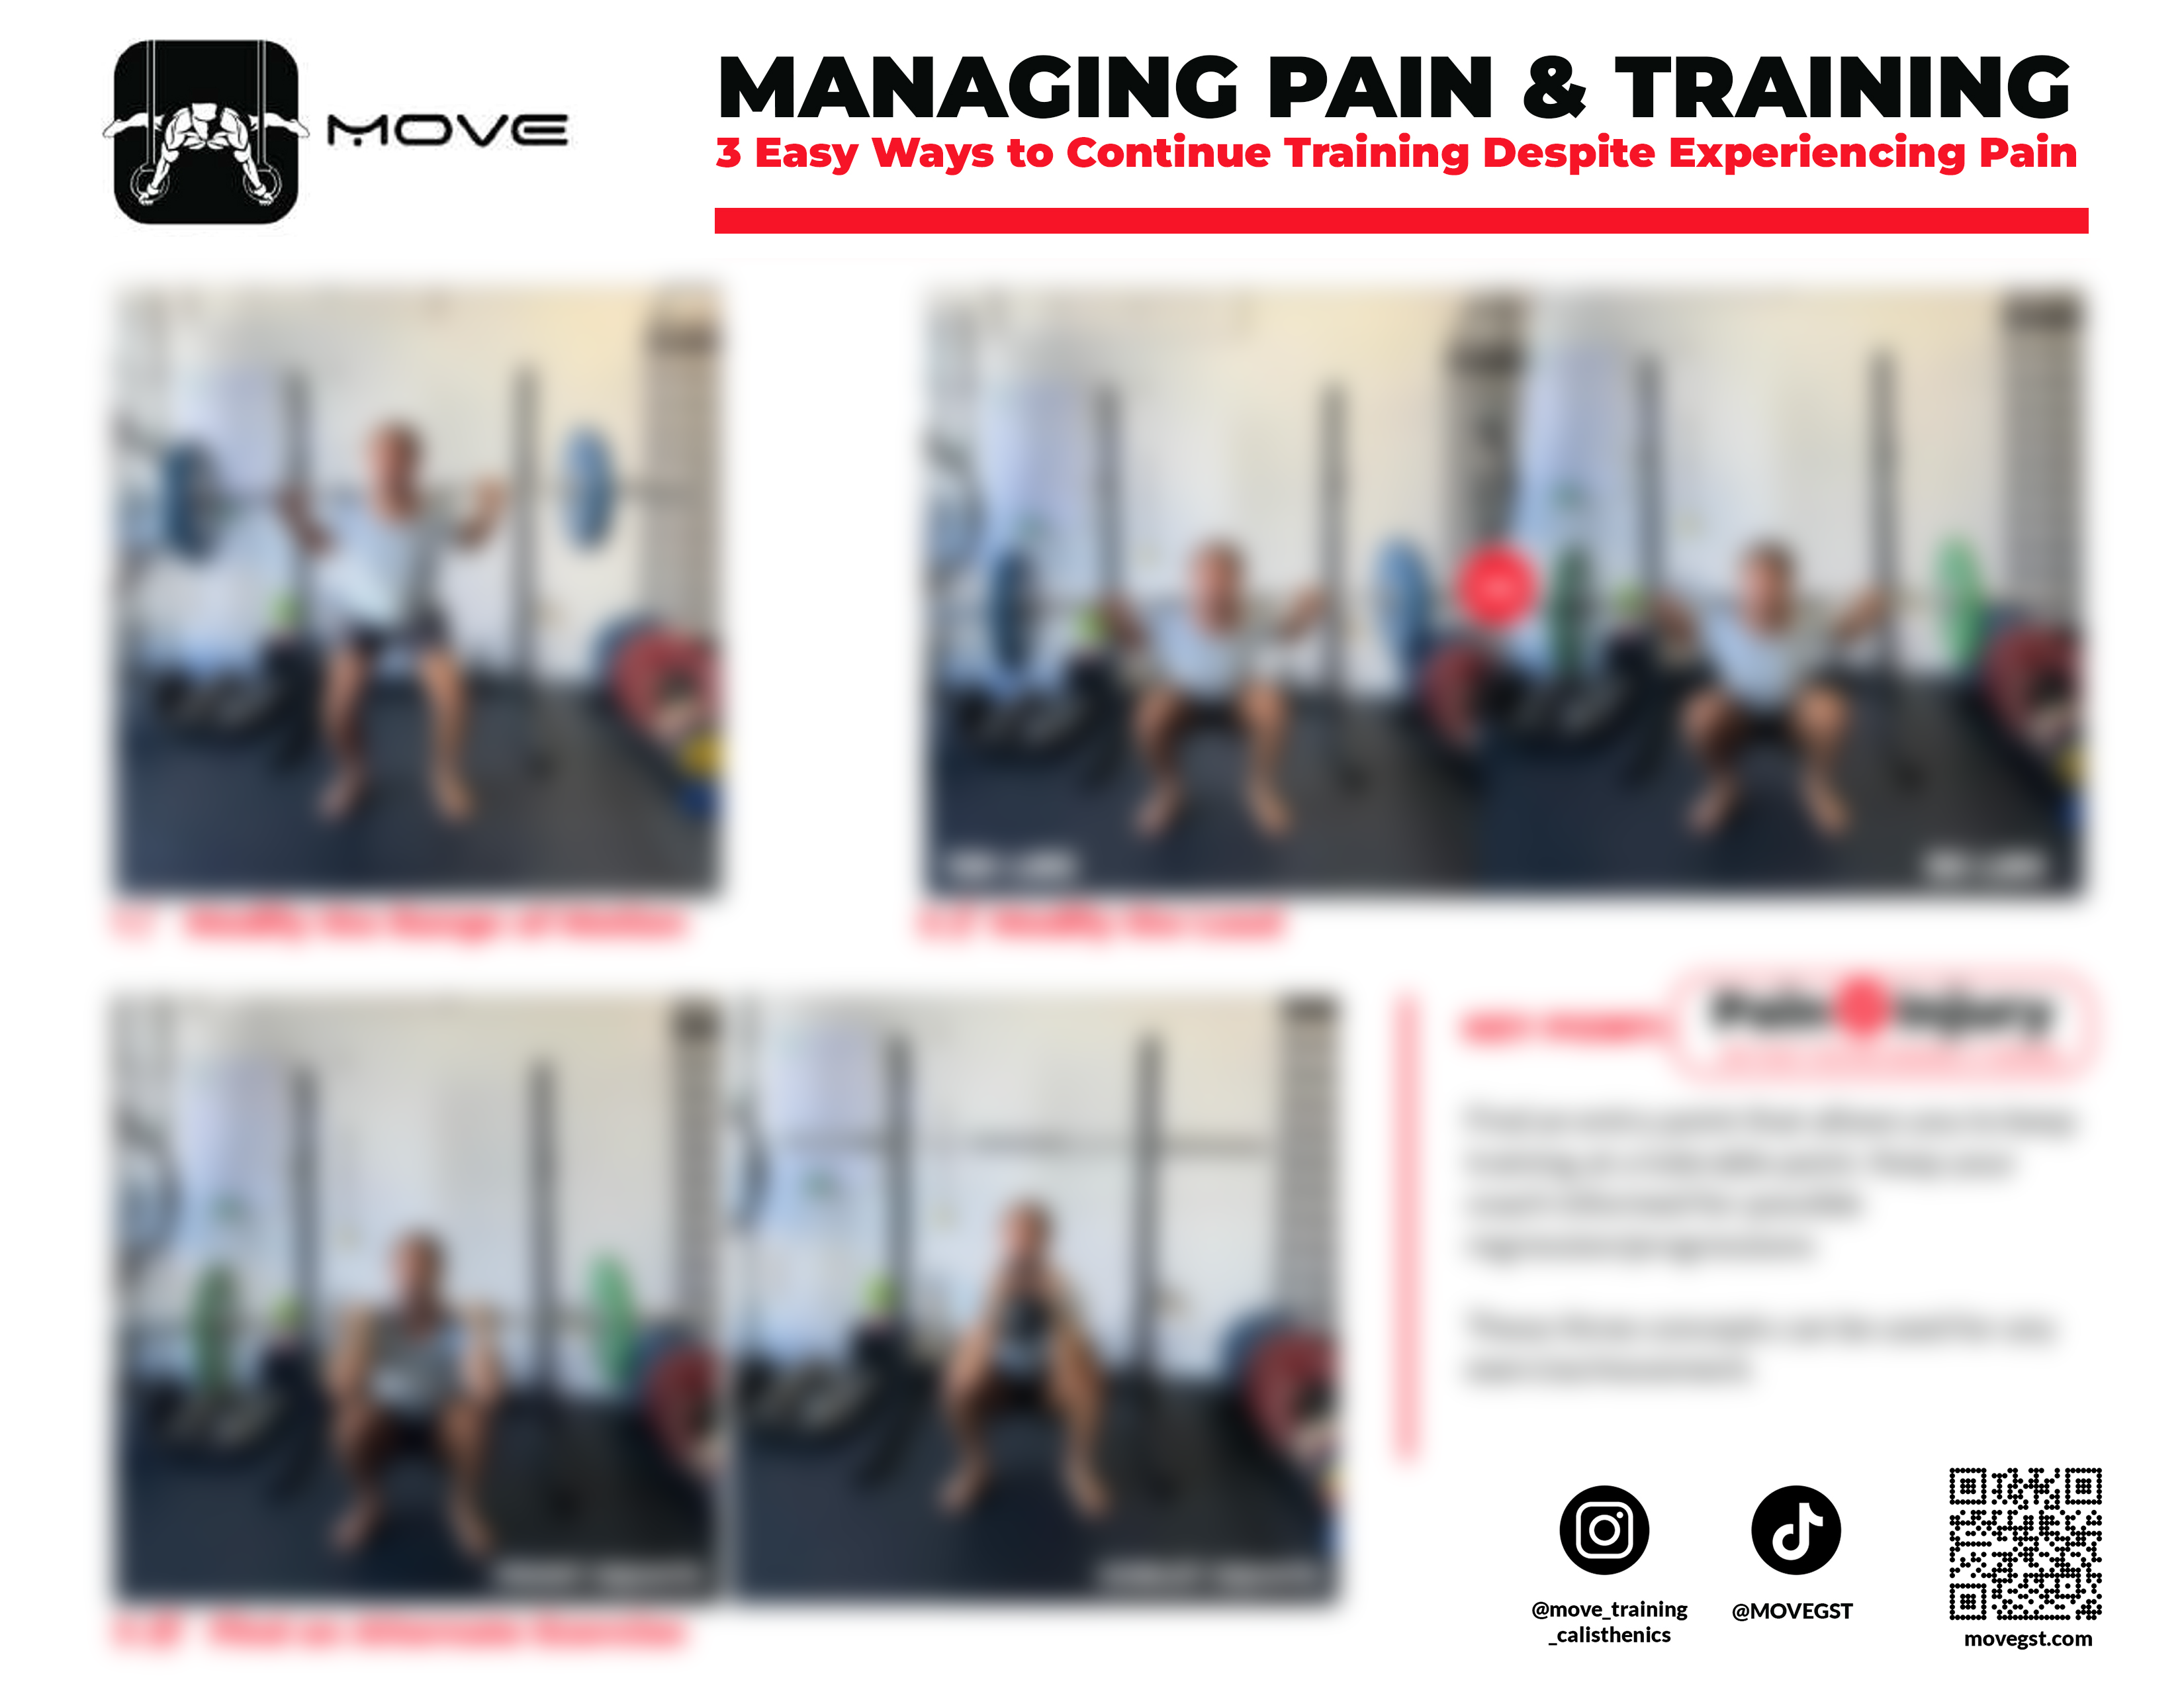 Managing Pain & Training Poster - MOVE